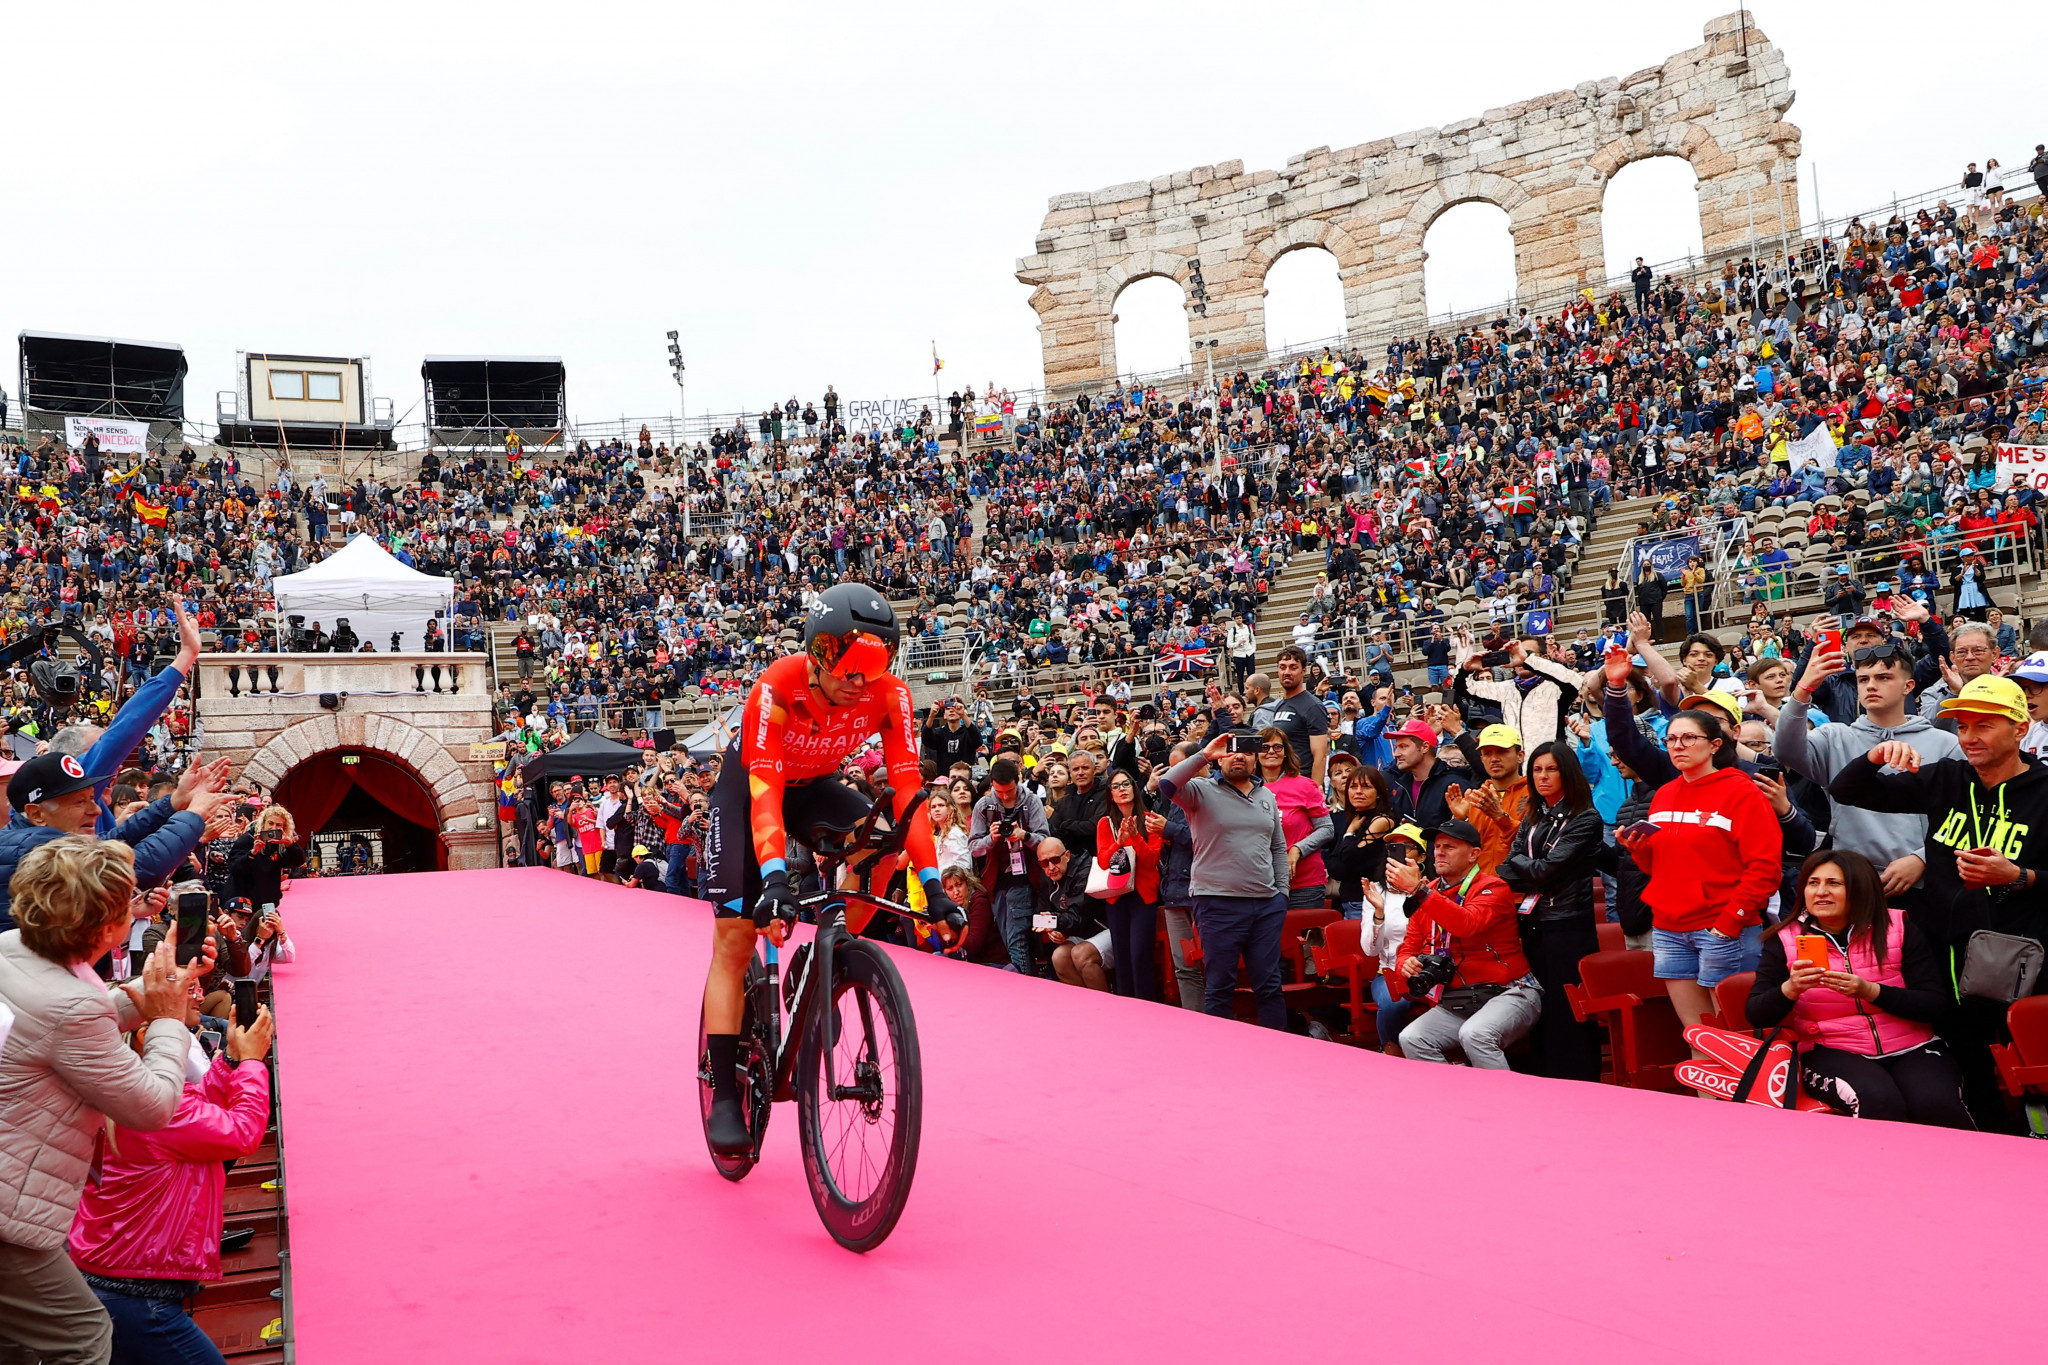 Accessibility is set to be improved at the Verona Arena in time for the Winter Olympics and Paralympic Closing Ceremony ©Getty Images